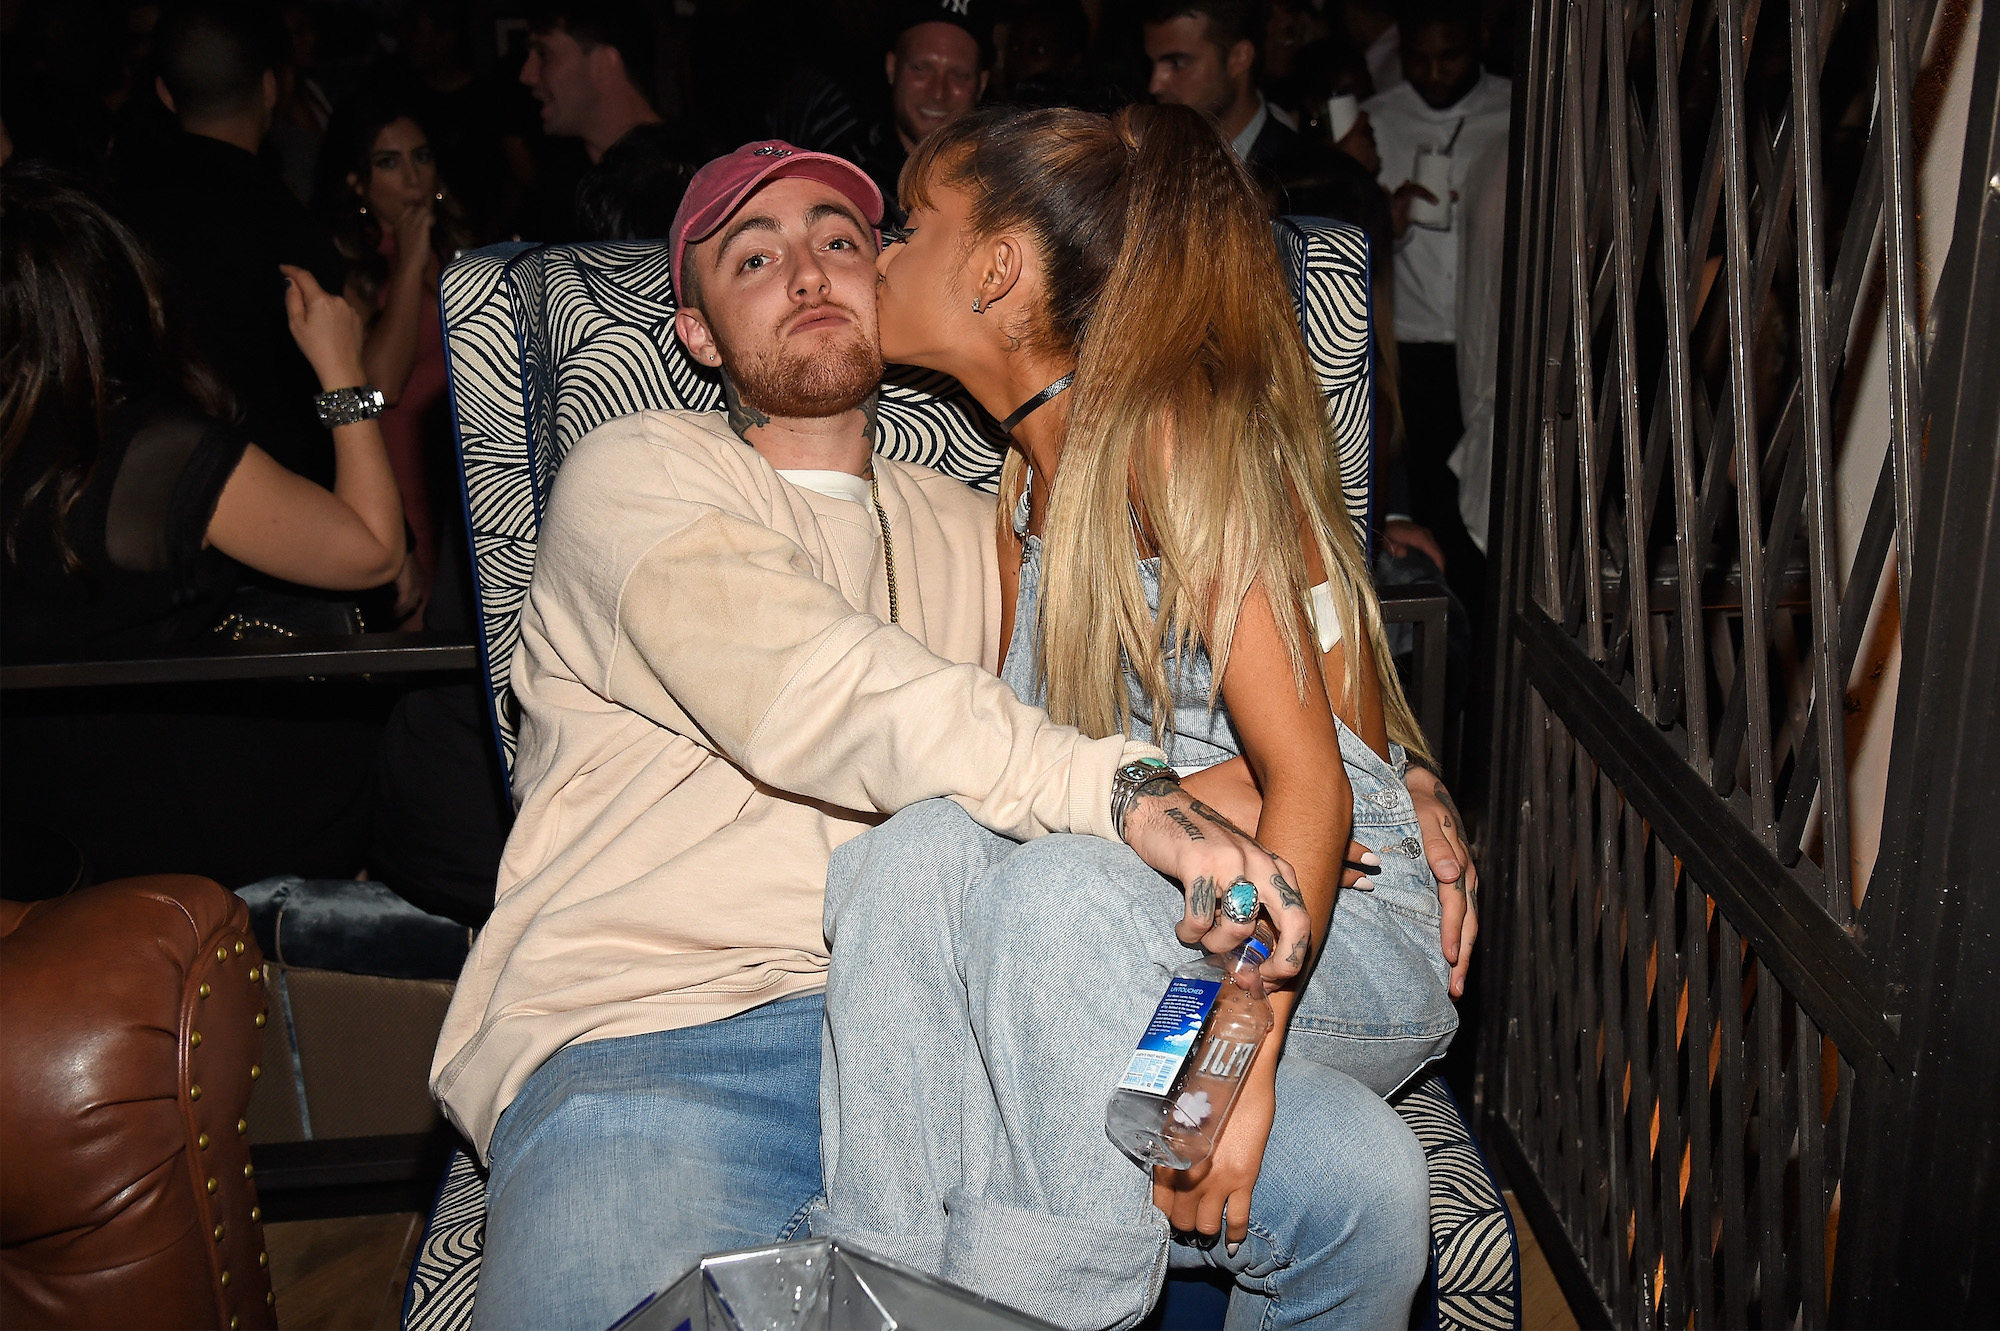 Mac Miller and Ariana Grande at the 2016 MTV Video Music Awards - Republic Records After Party